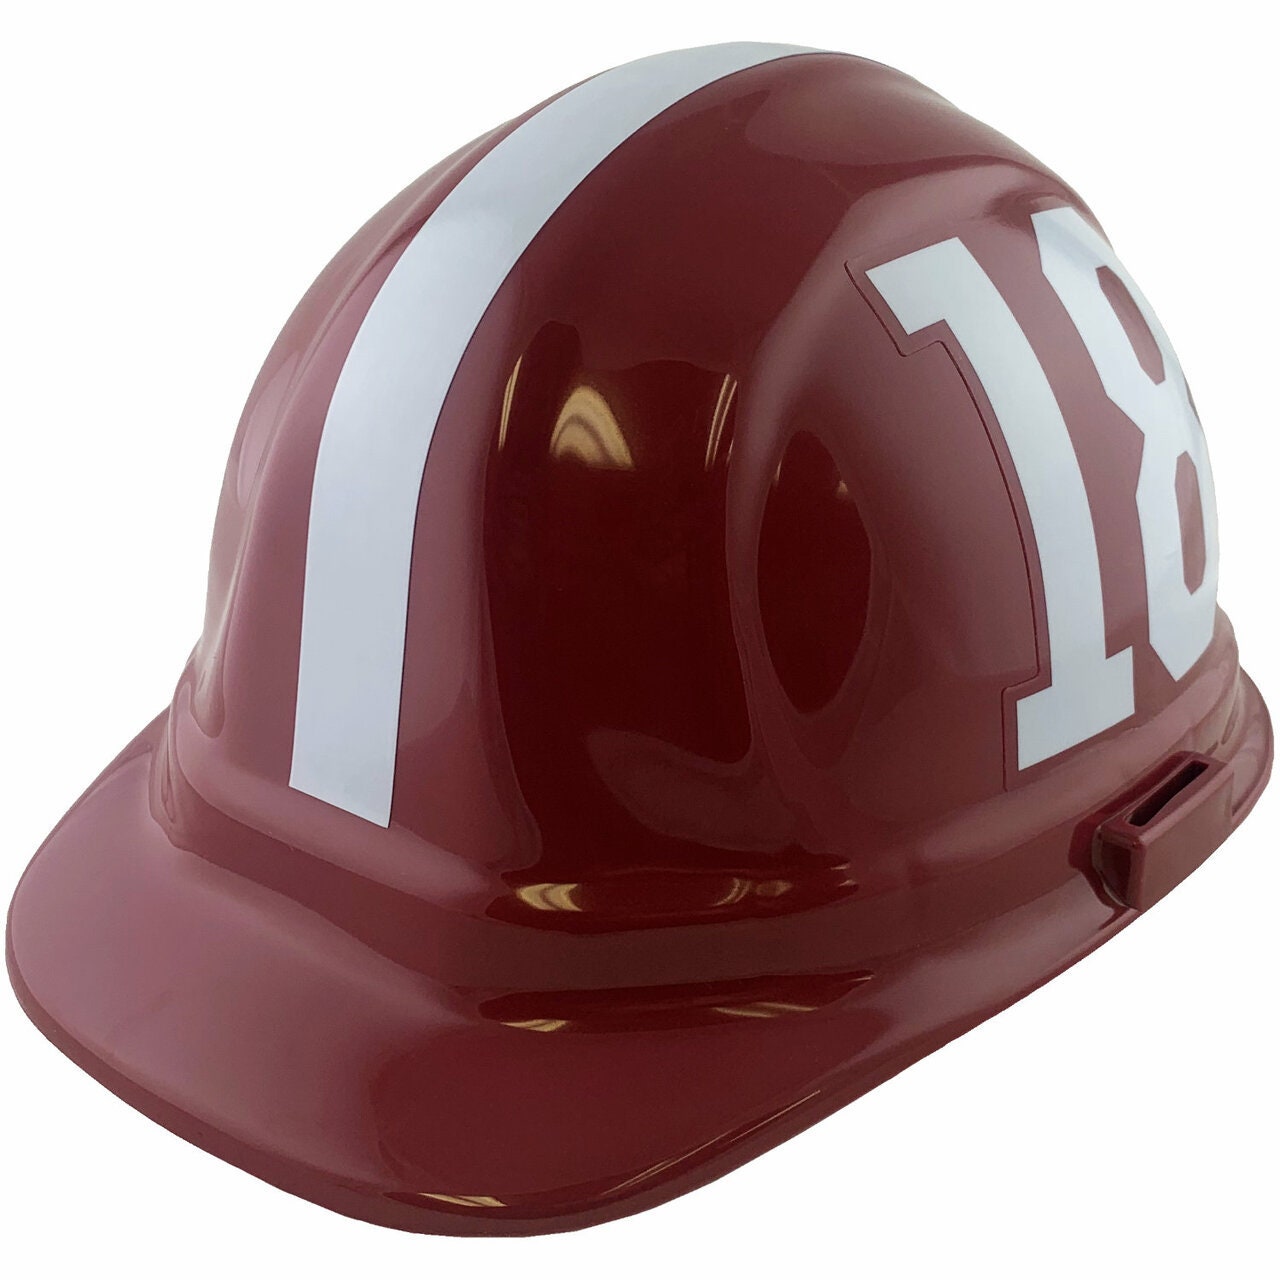 Outlaw Cowboy Style Safety Hard Hat "MAROON" Ratchet Susp ANSI/OSHA Approved 